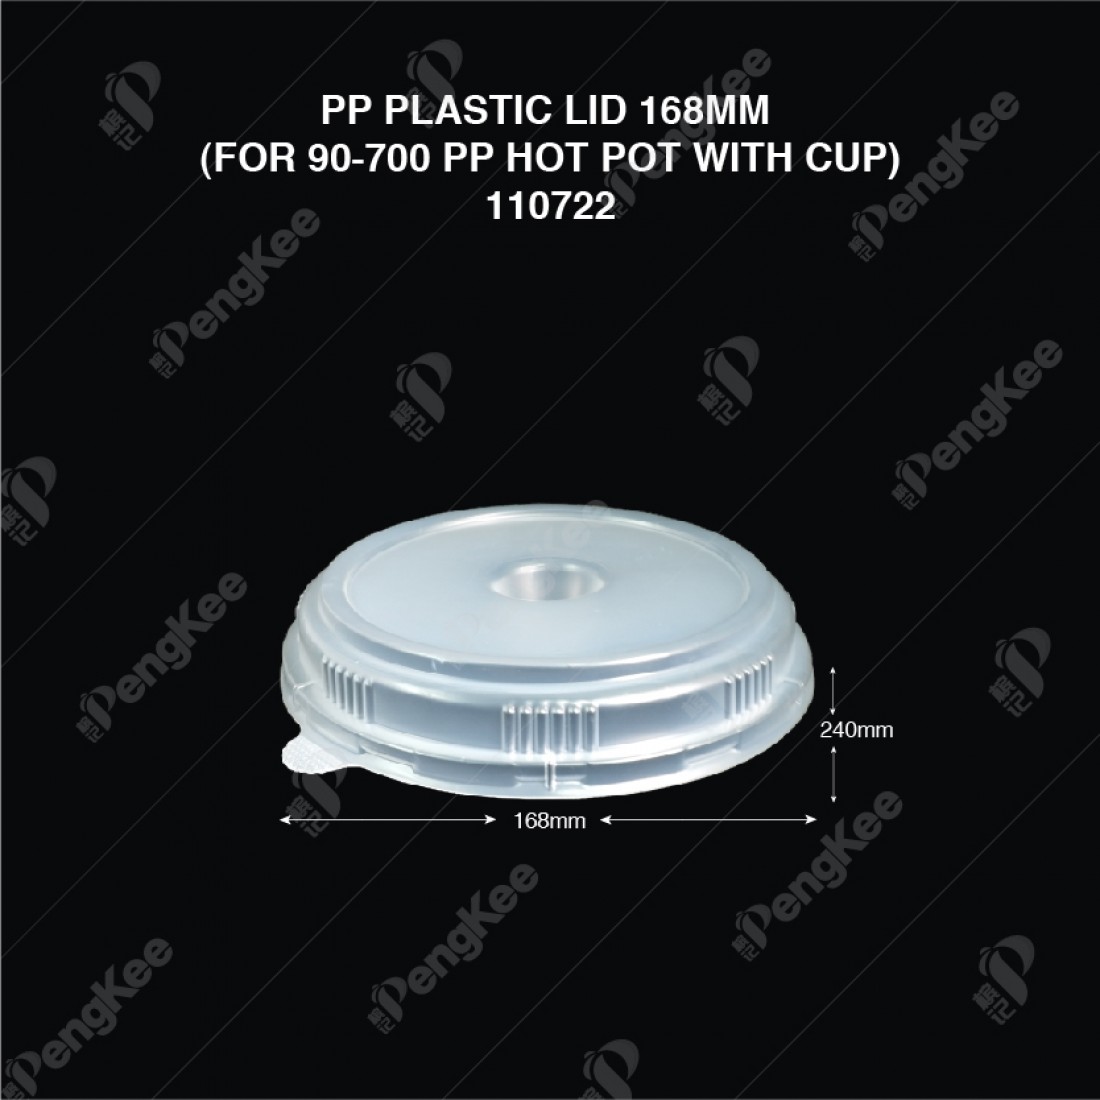 PP PLASTIC LID 168MM (FOR 90-700 PP HOT POT WITH CUP) 300'S/CTN